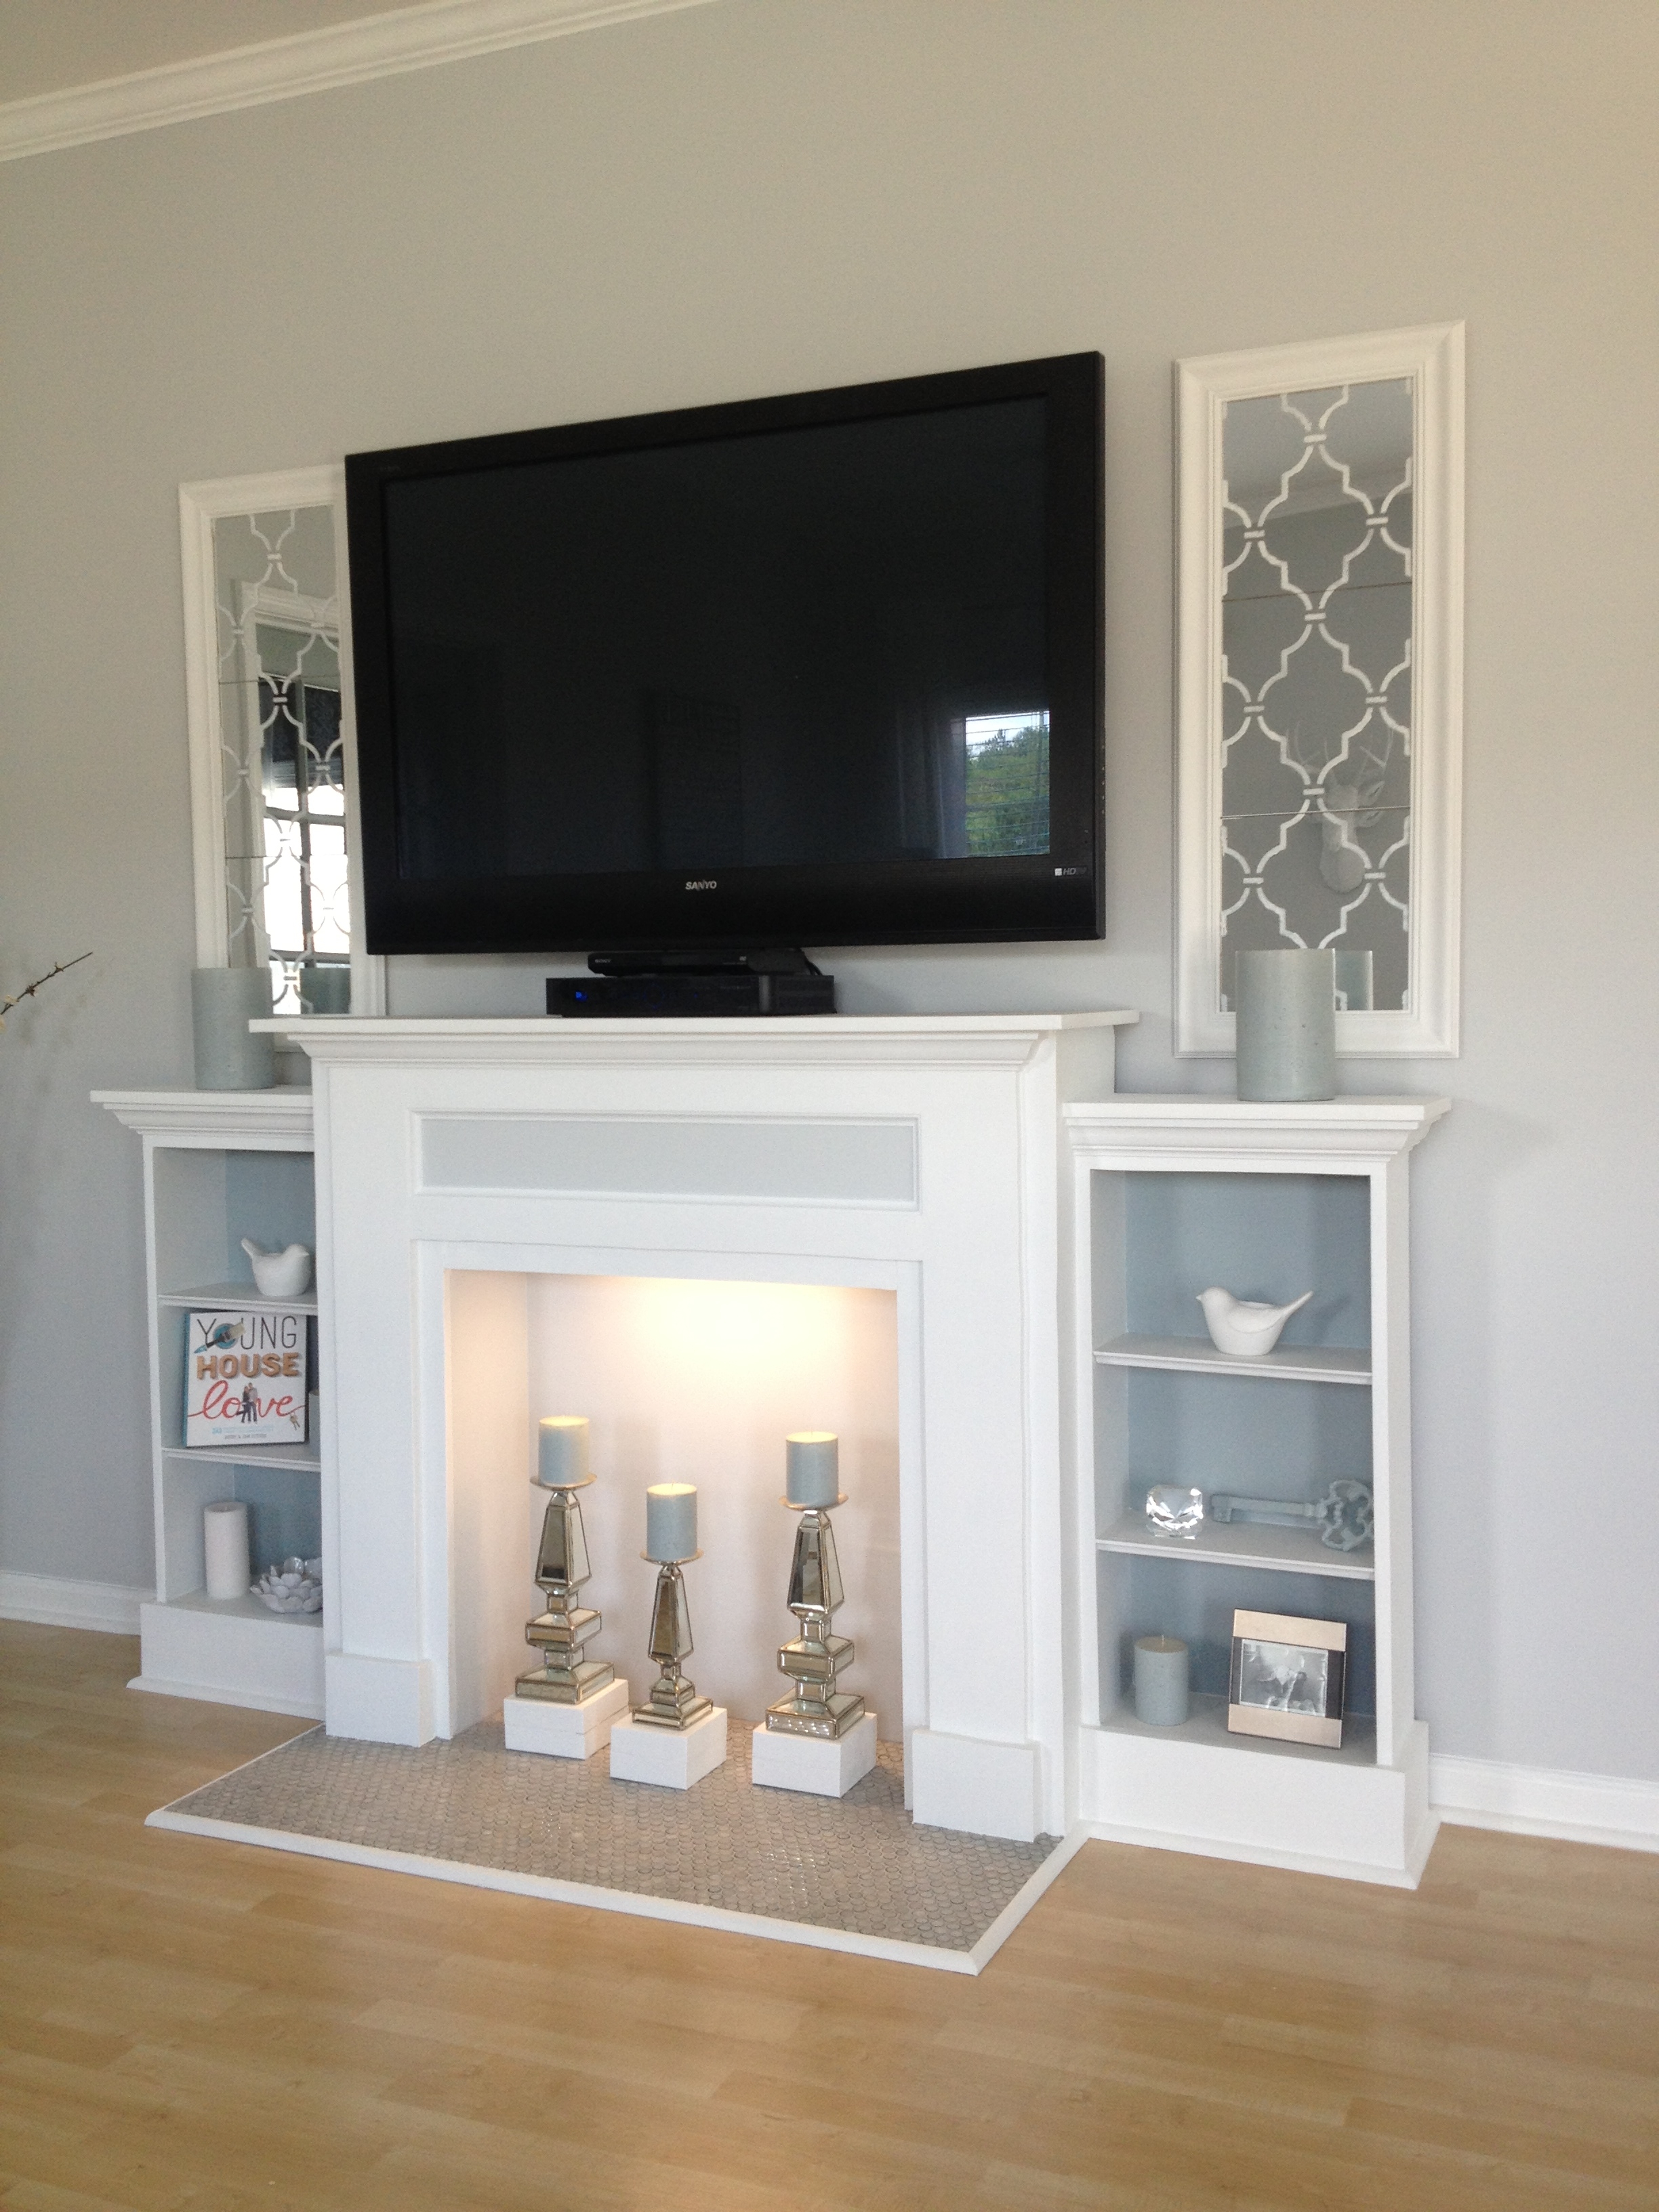 How to build a built in entertainment center